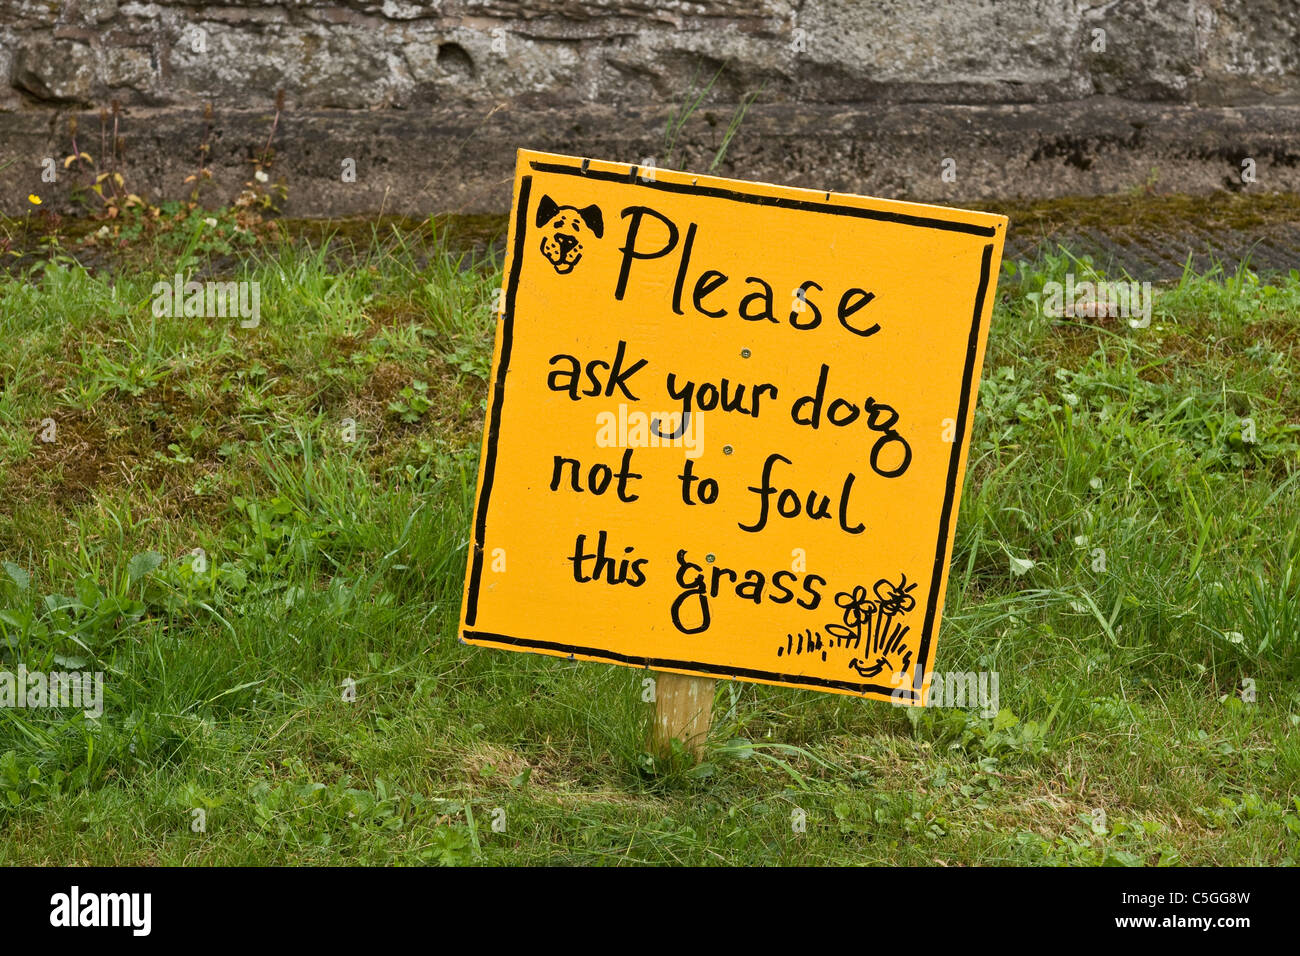 Polite notice to dog owners photographed at Grosmont in North Yorkshire, UK Stock Photo